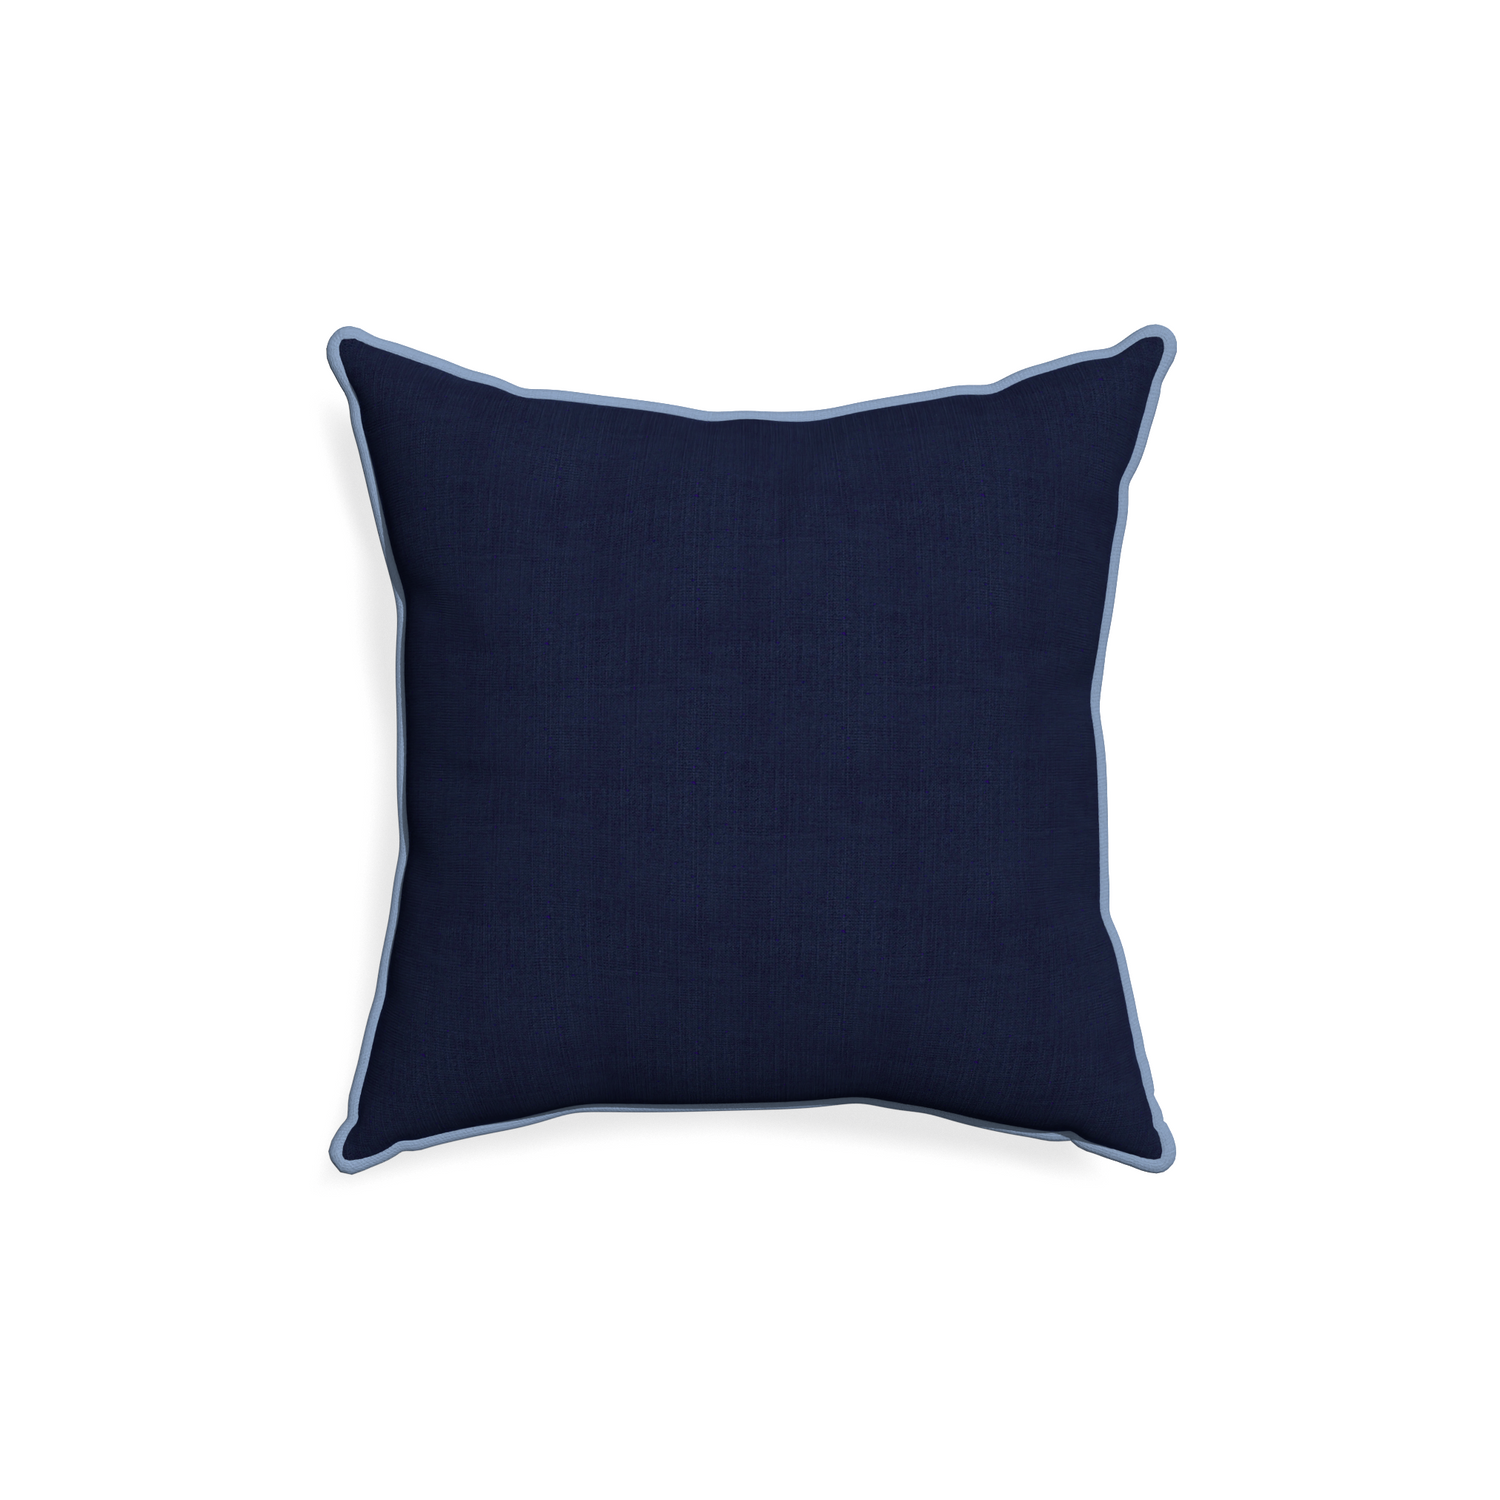 18-square midnight custom pillow with sky piping on white background